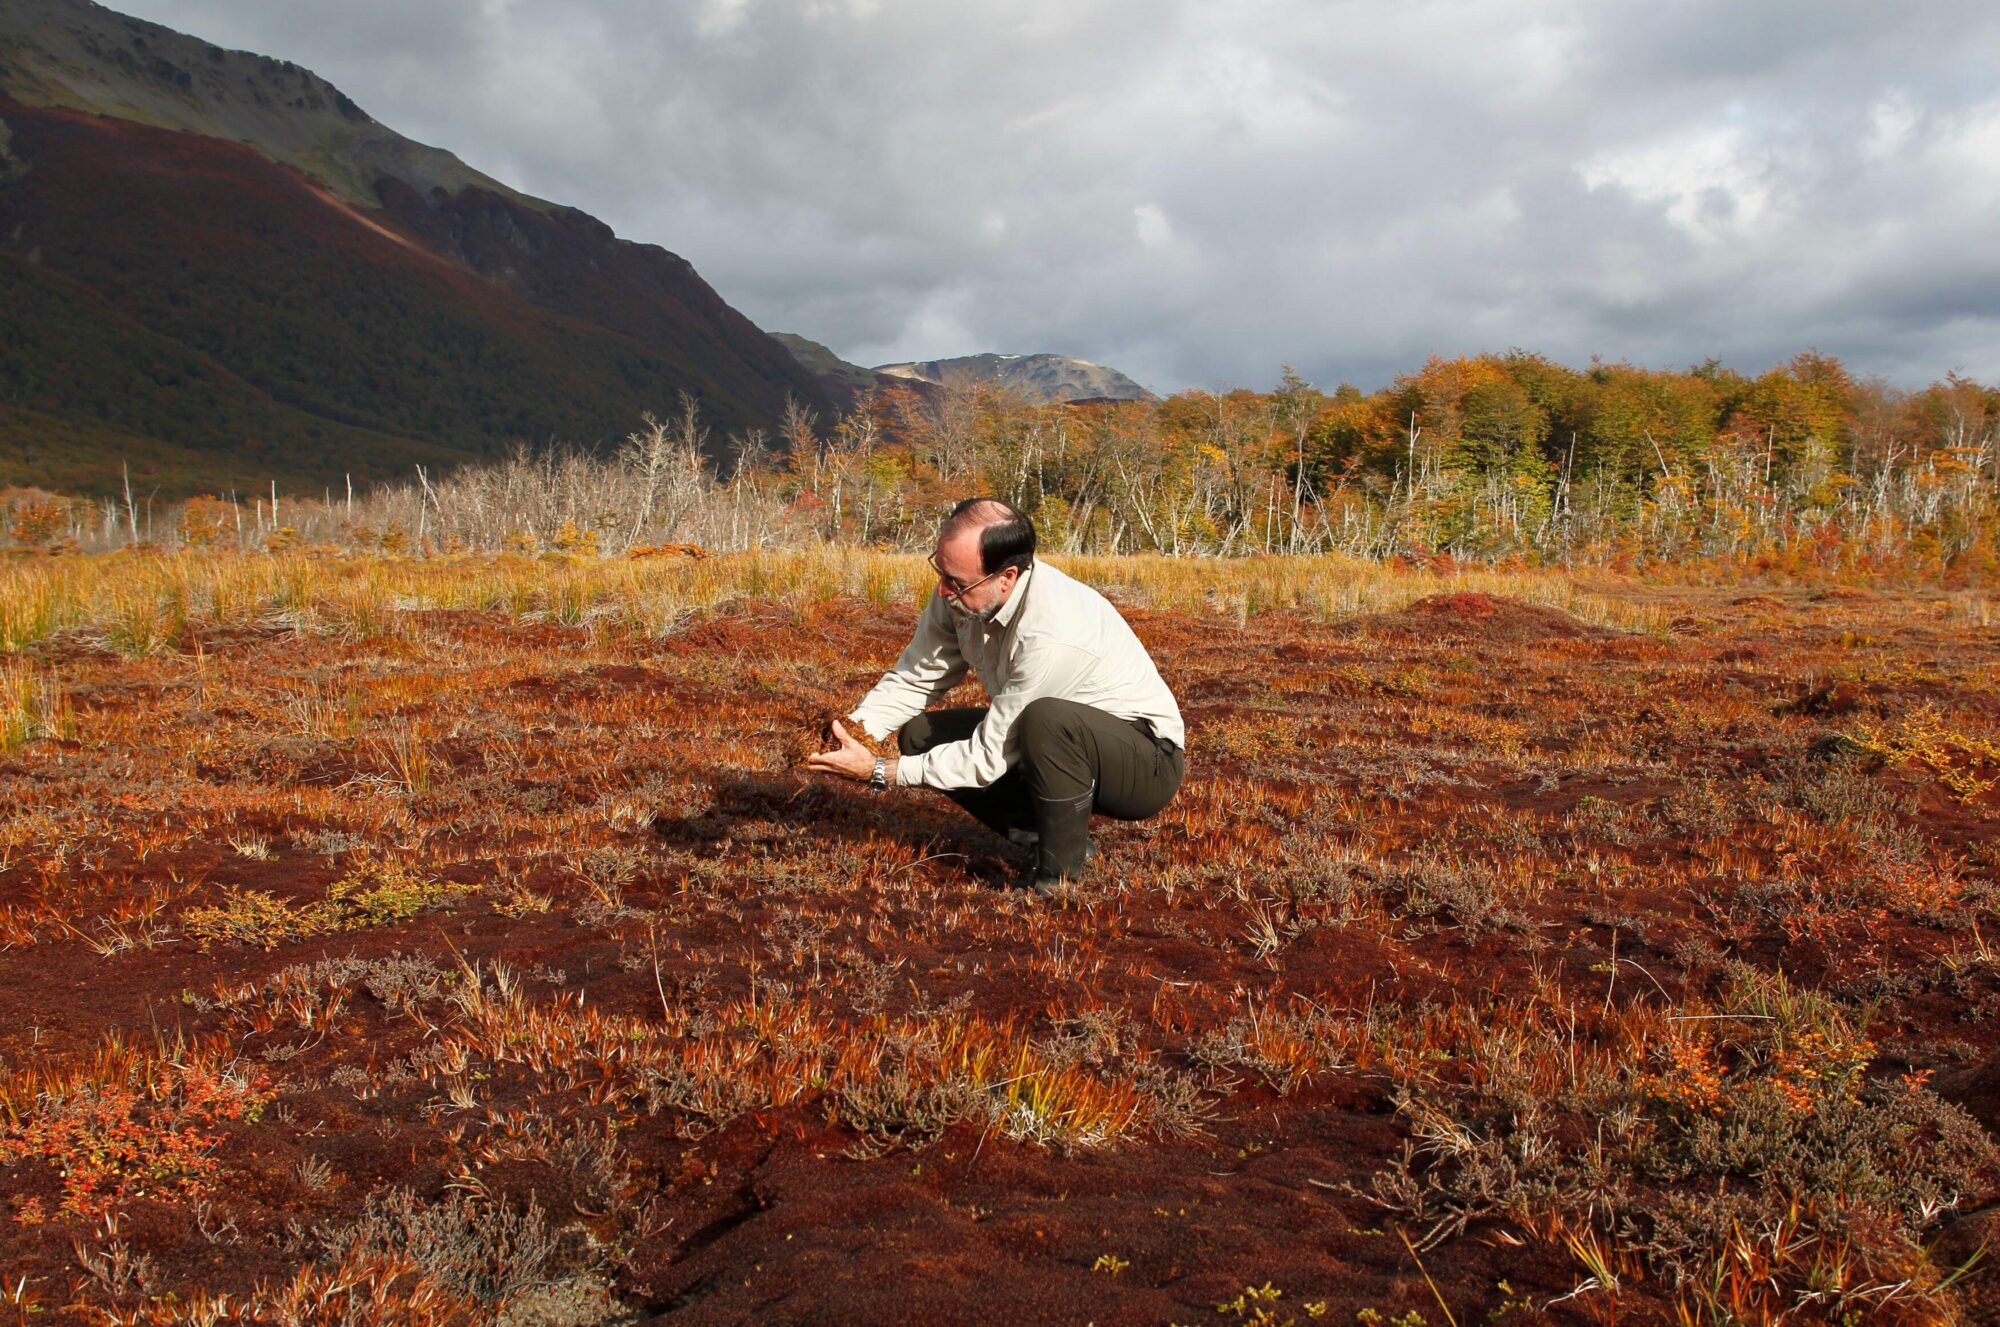 <p>Engineer Rodolfo Iturraspe, from the Argentine province of Tierra del Fuego’s water management agency, picks up samples of peat in wetlands. The global south is underrepresented in international climate science. (Image: Enrique Marcarian / Alamy)</p>